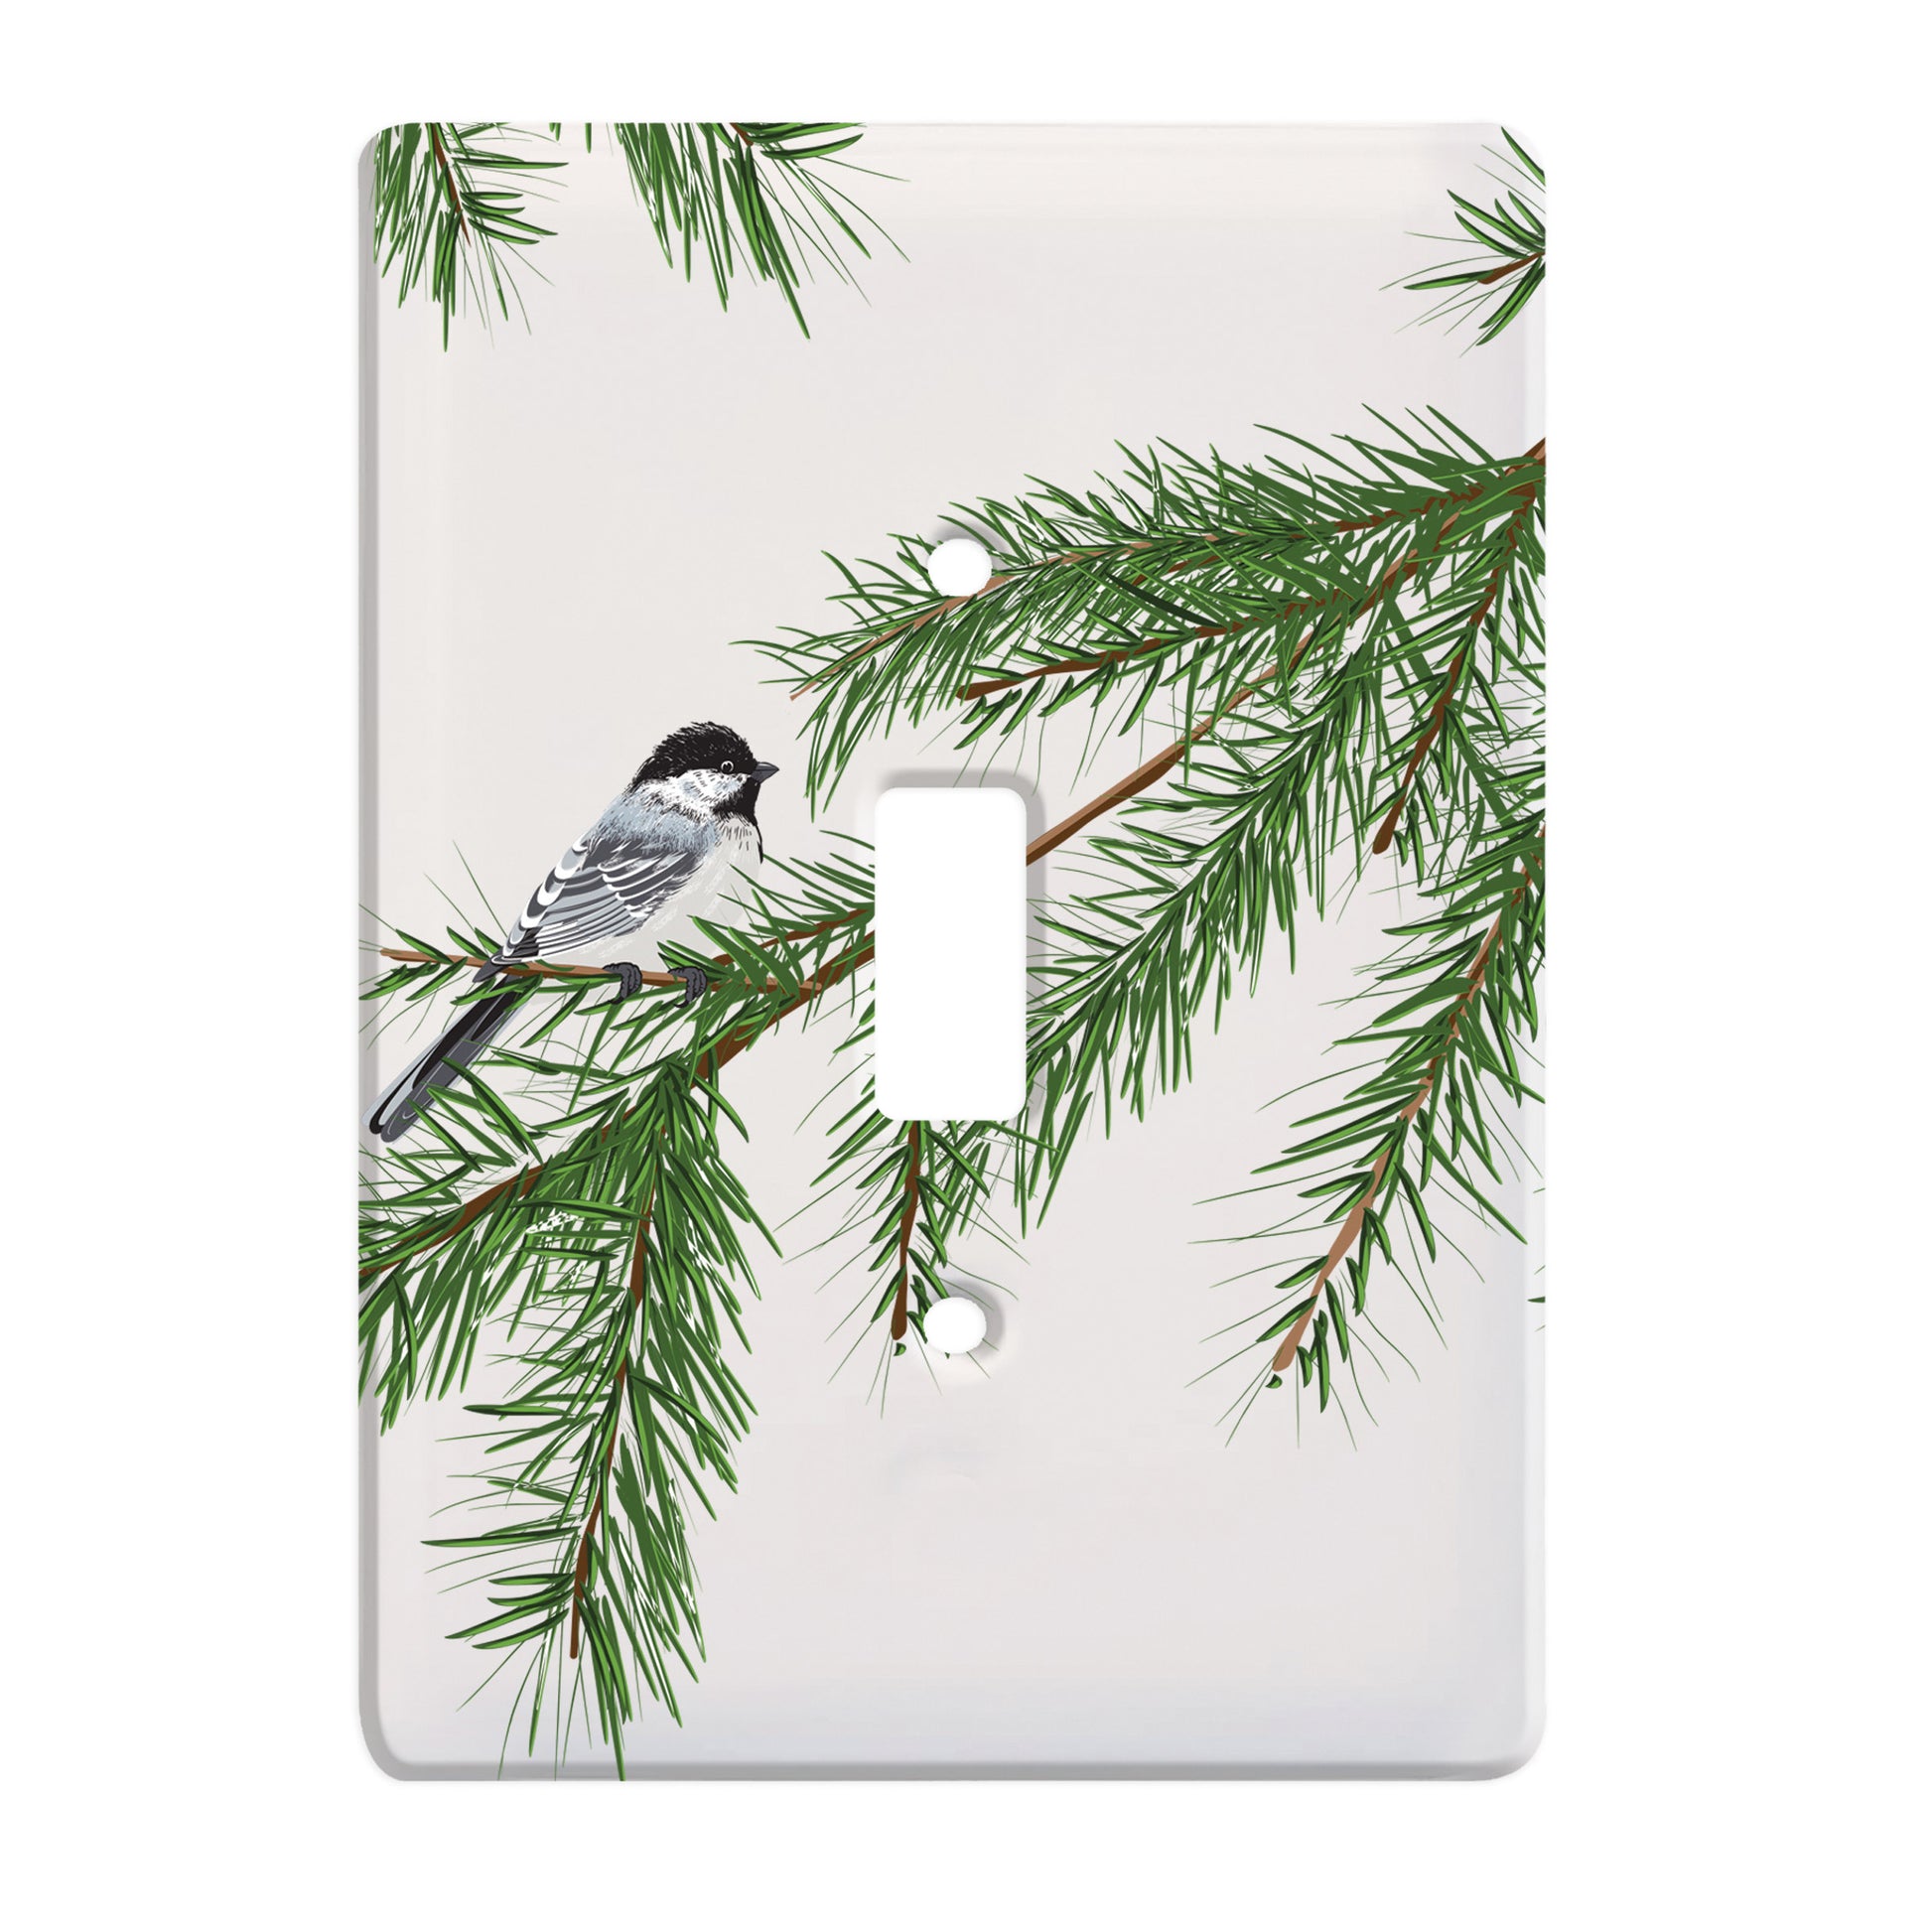 ceramic single toggle switch plate featuring chickadee bird sitting upon a pine tree branch.